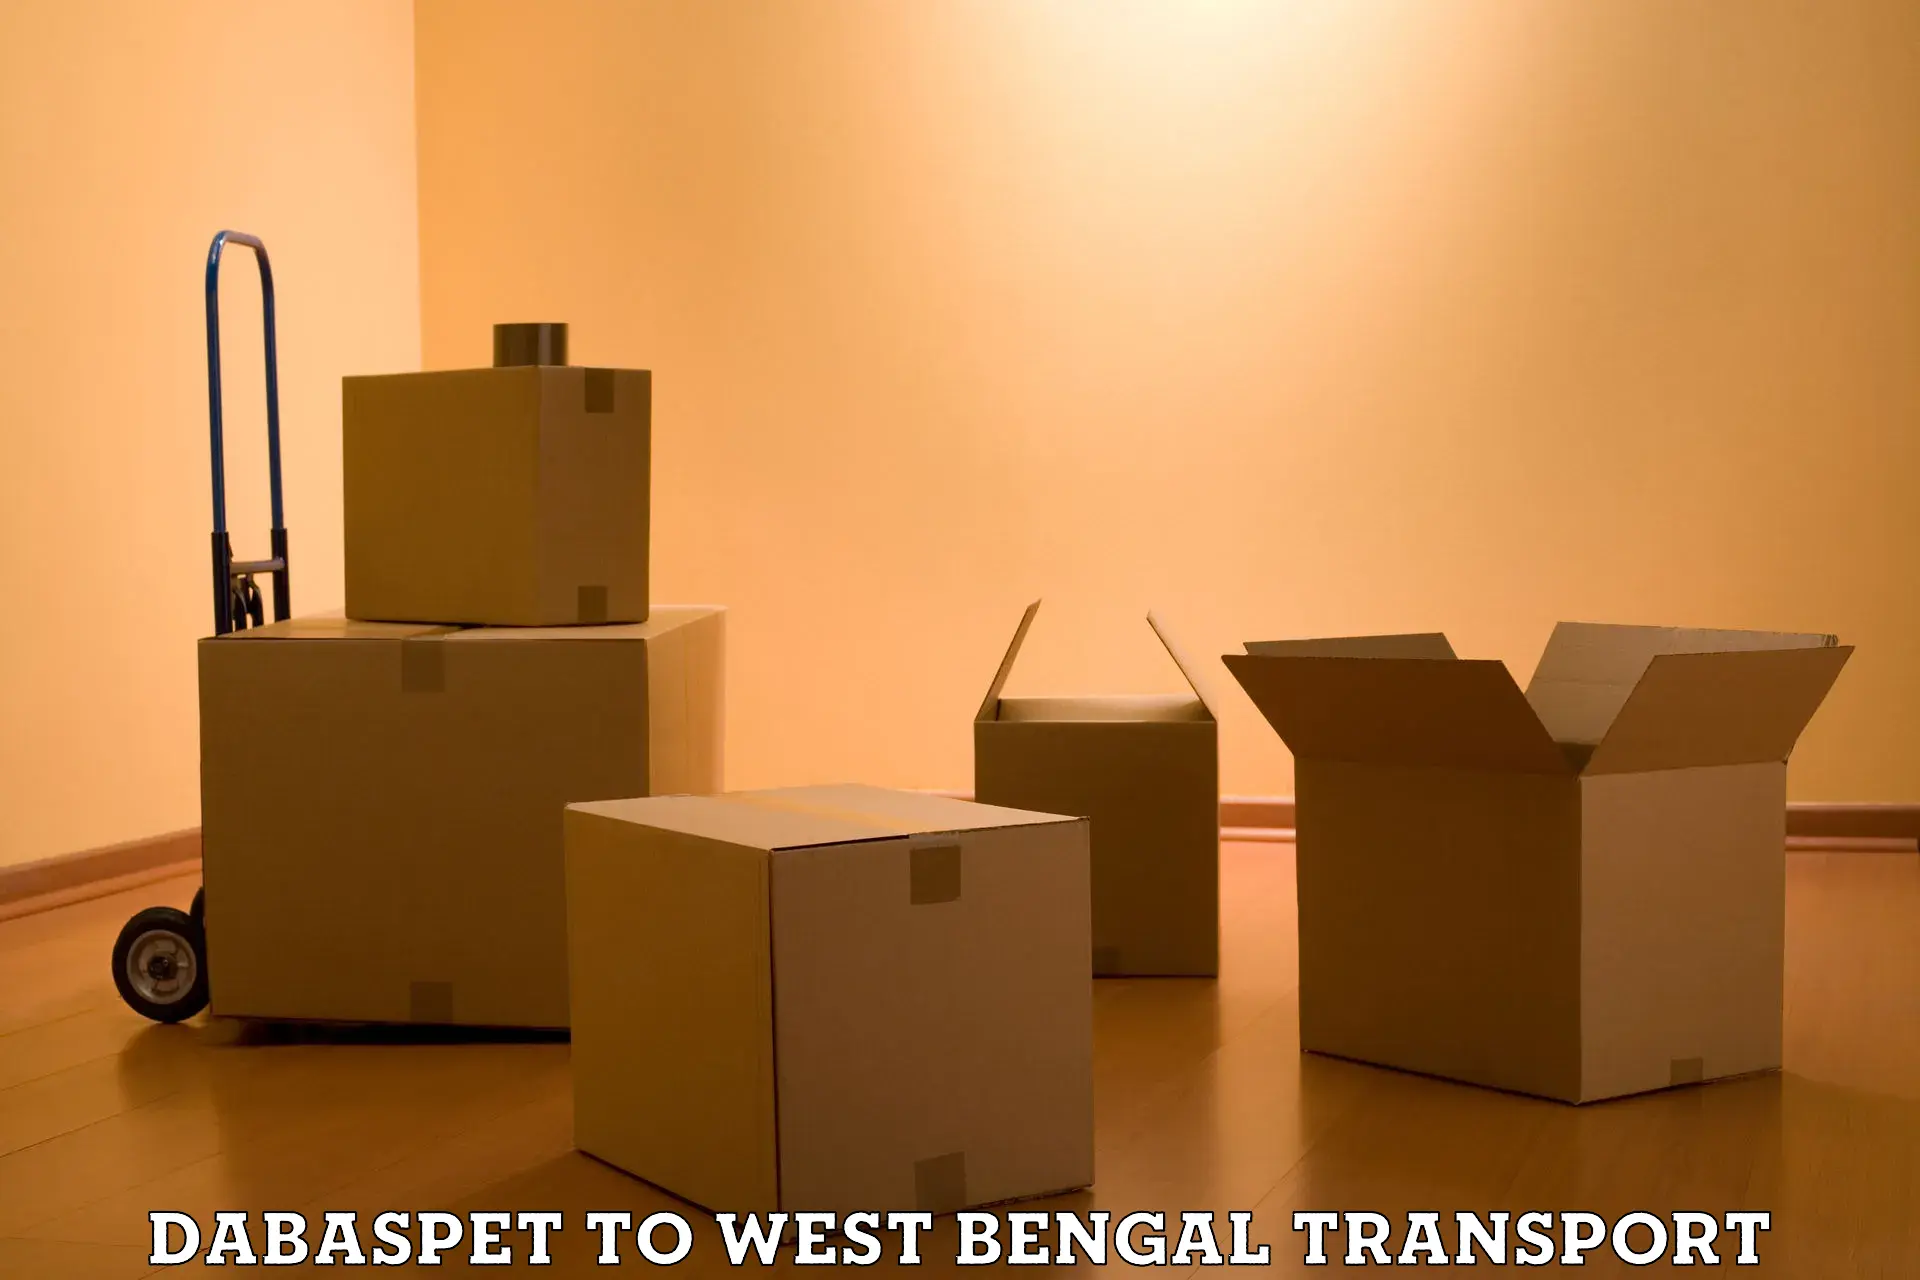 Delivery service Dabaspet to West Bengal